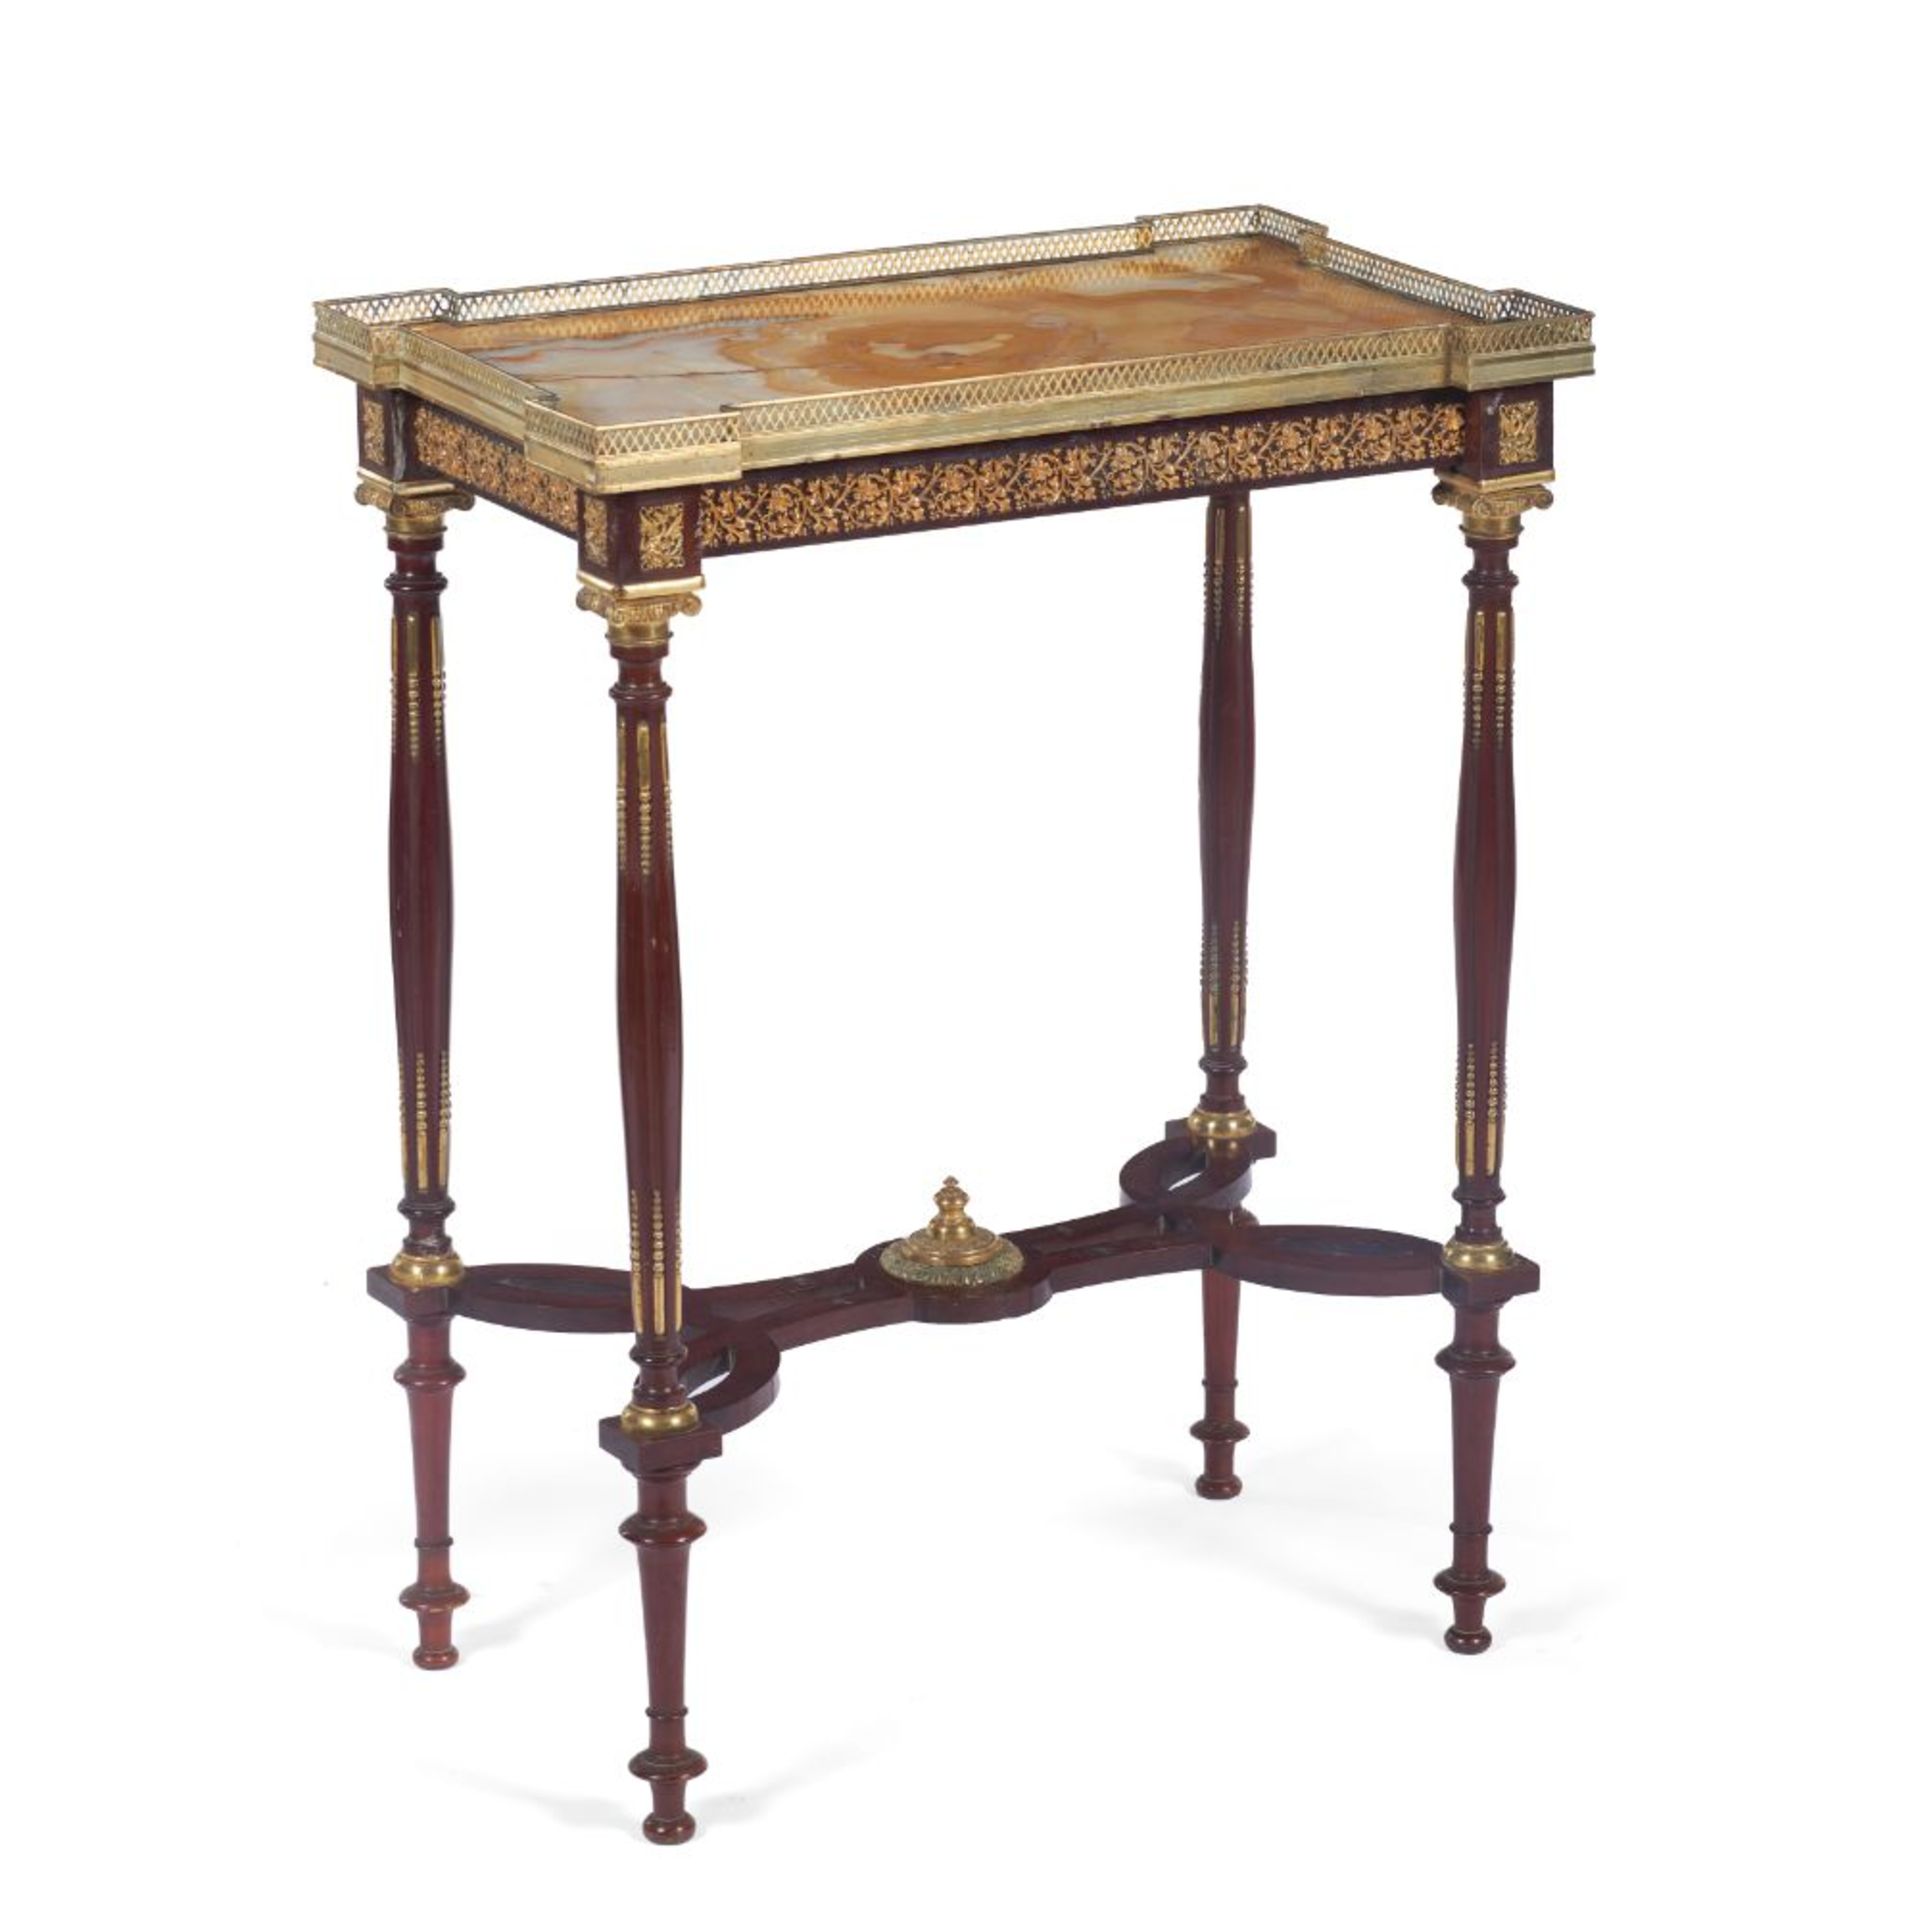 A Napoleon III gueridon, Mahogany, Ribbed legs, marble top of gilt metal gallery and applied